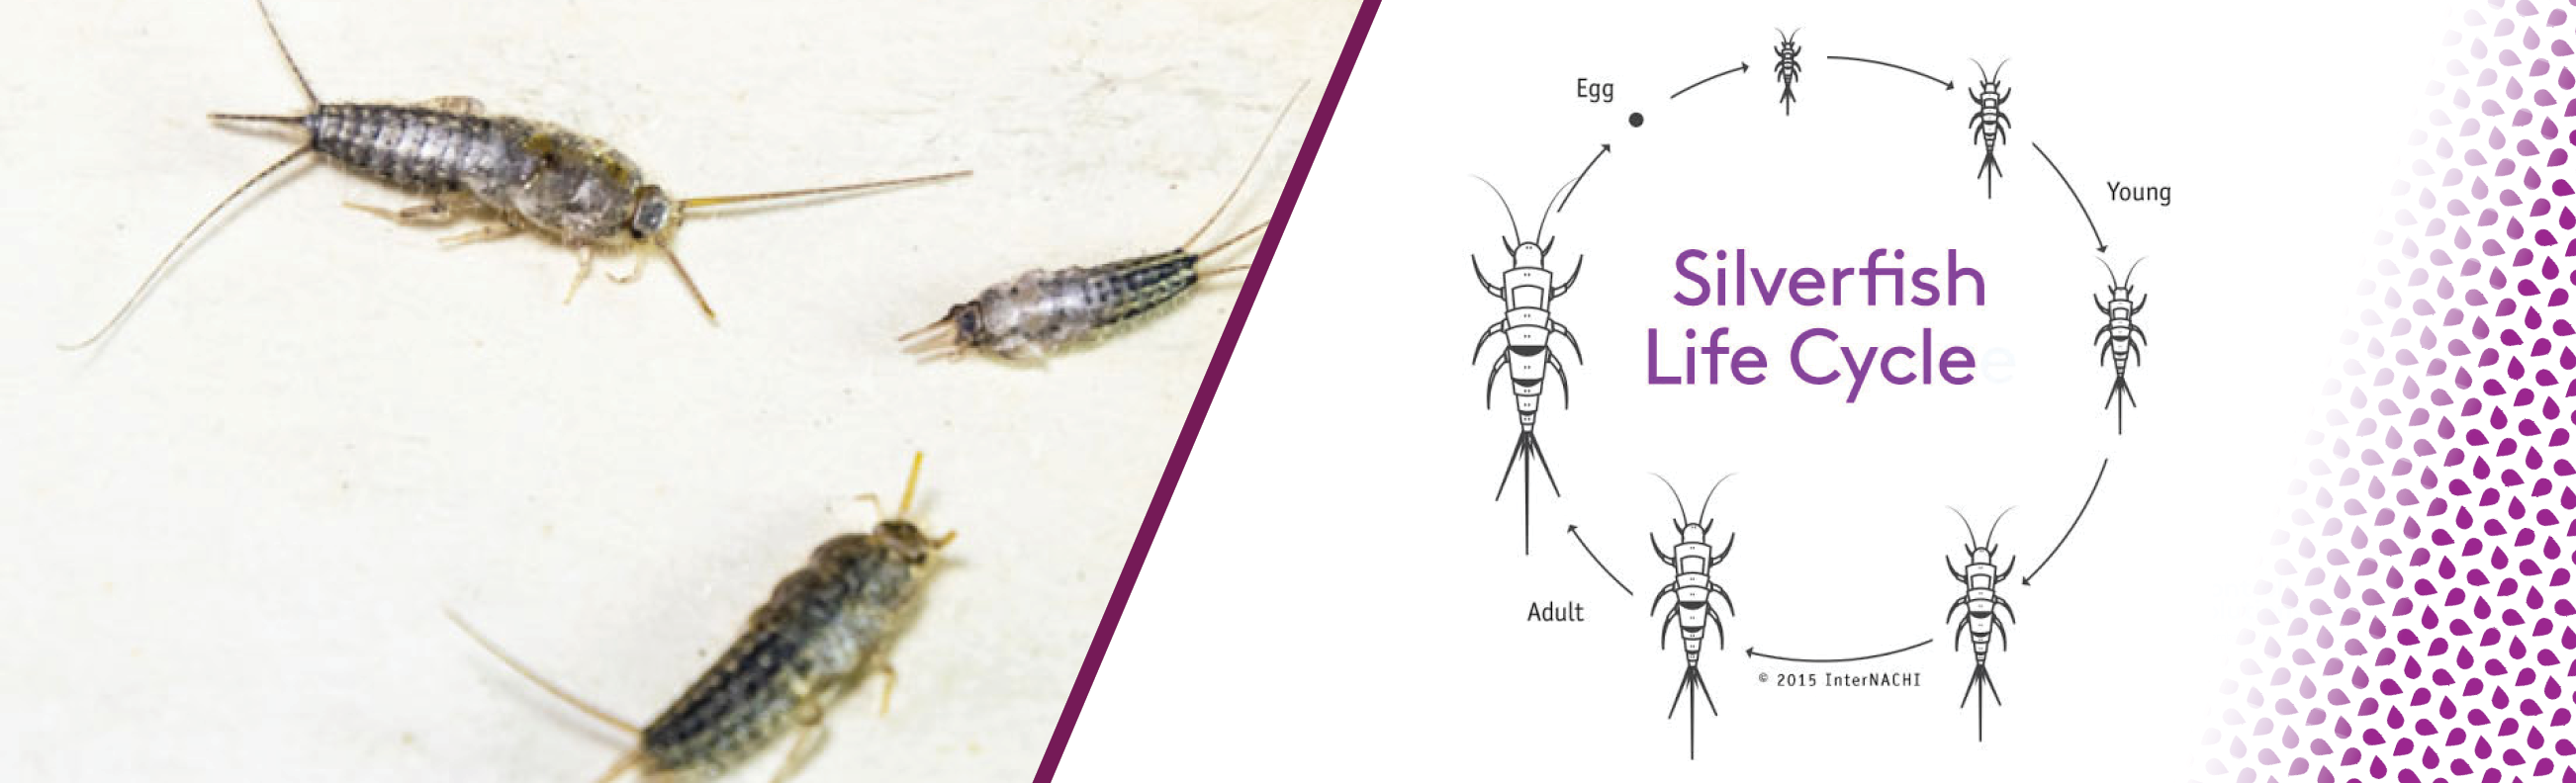 Facts About Silverfish You Won't Believe